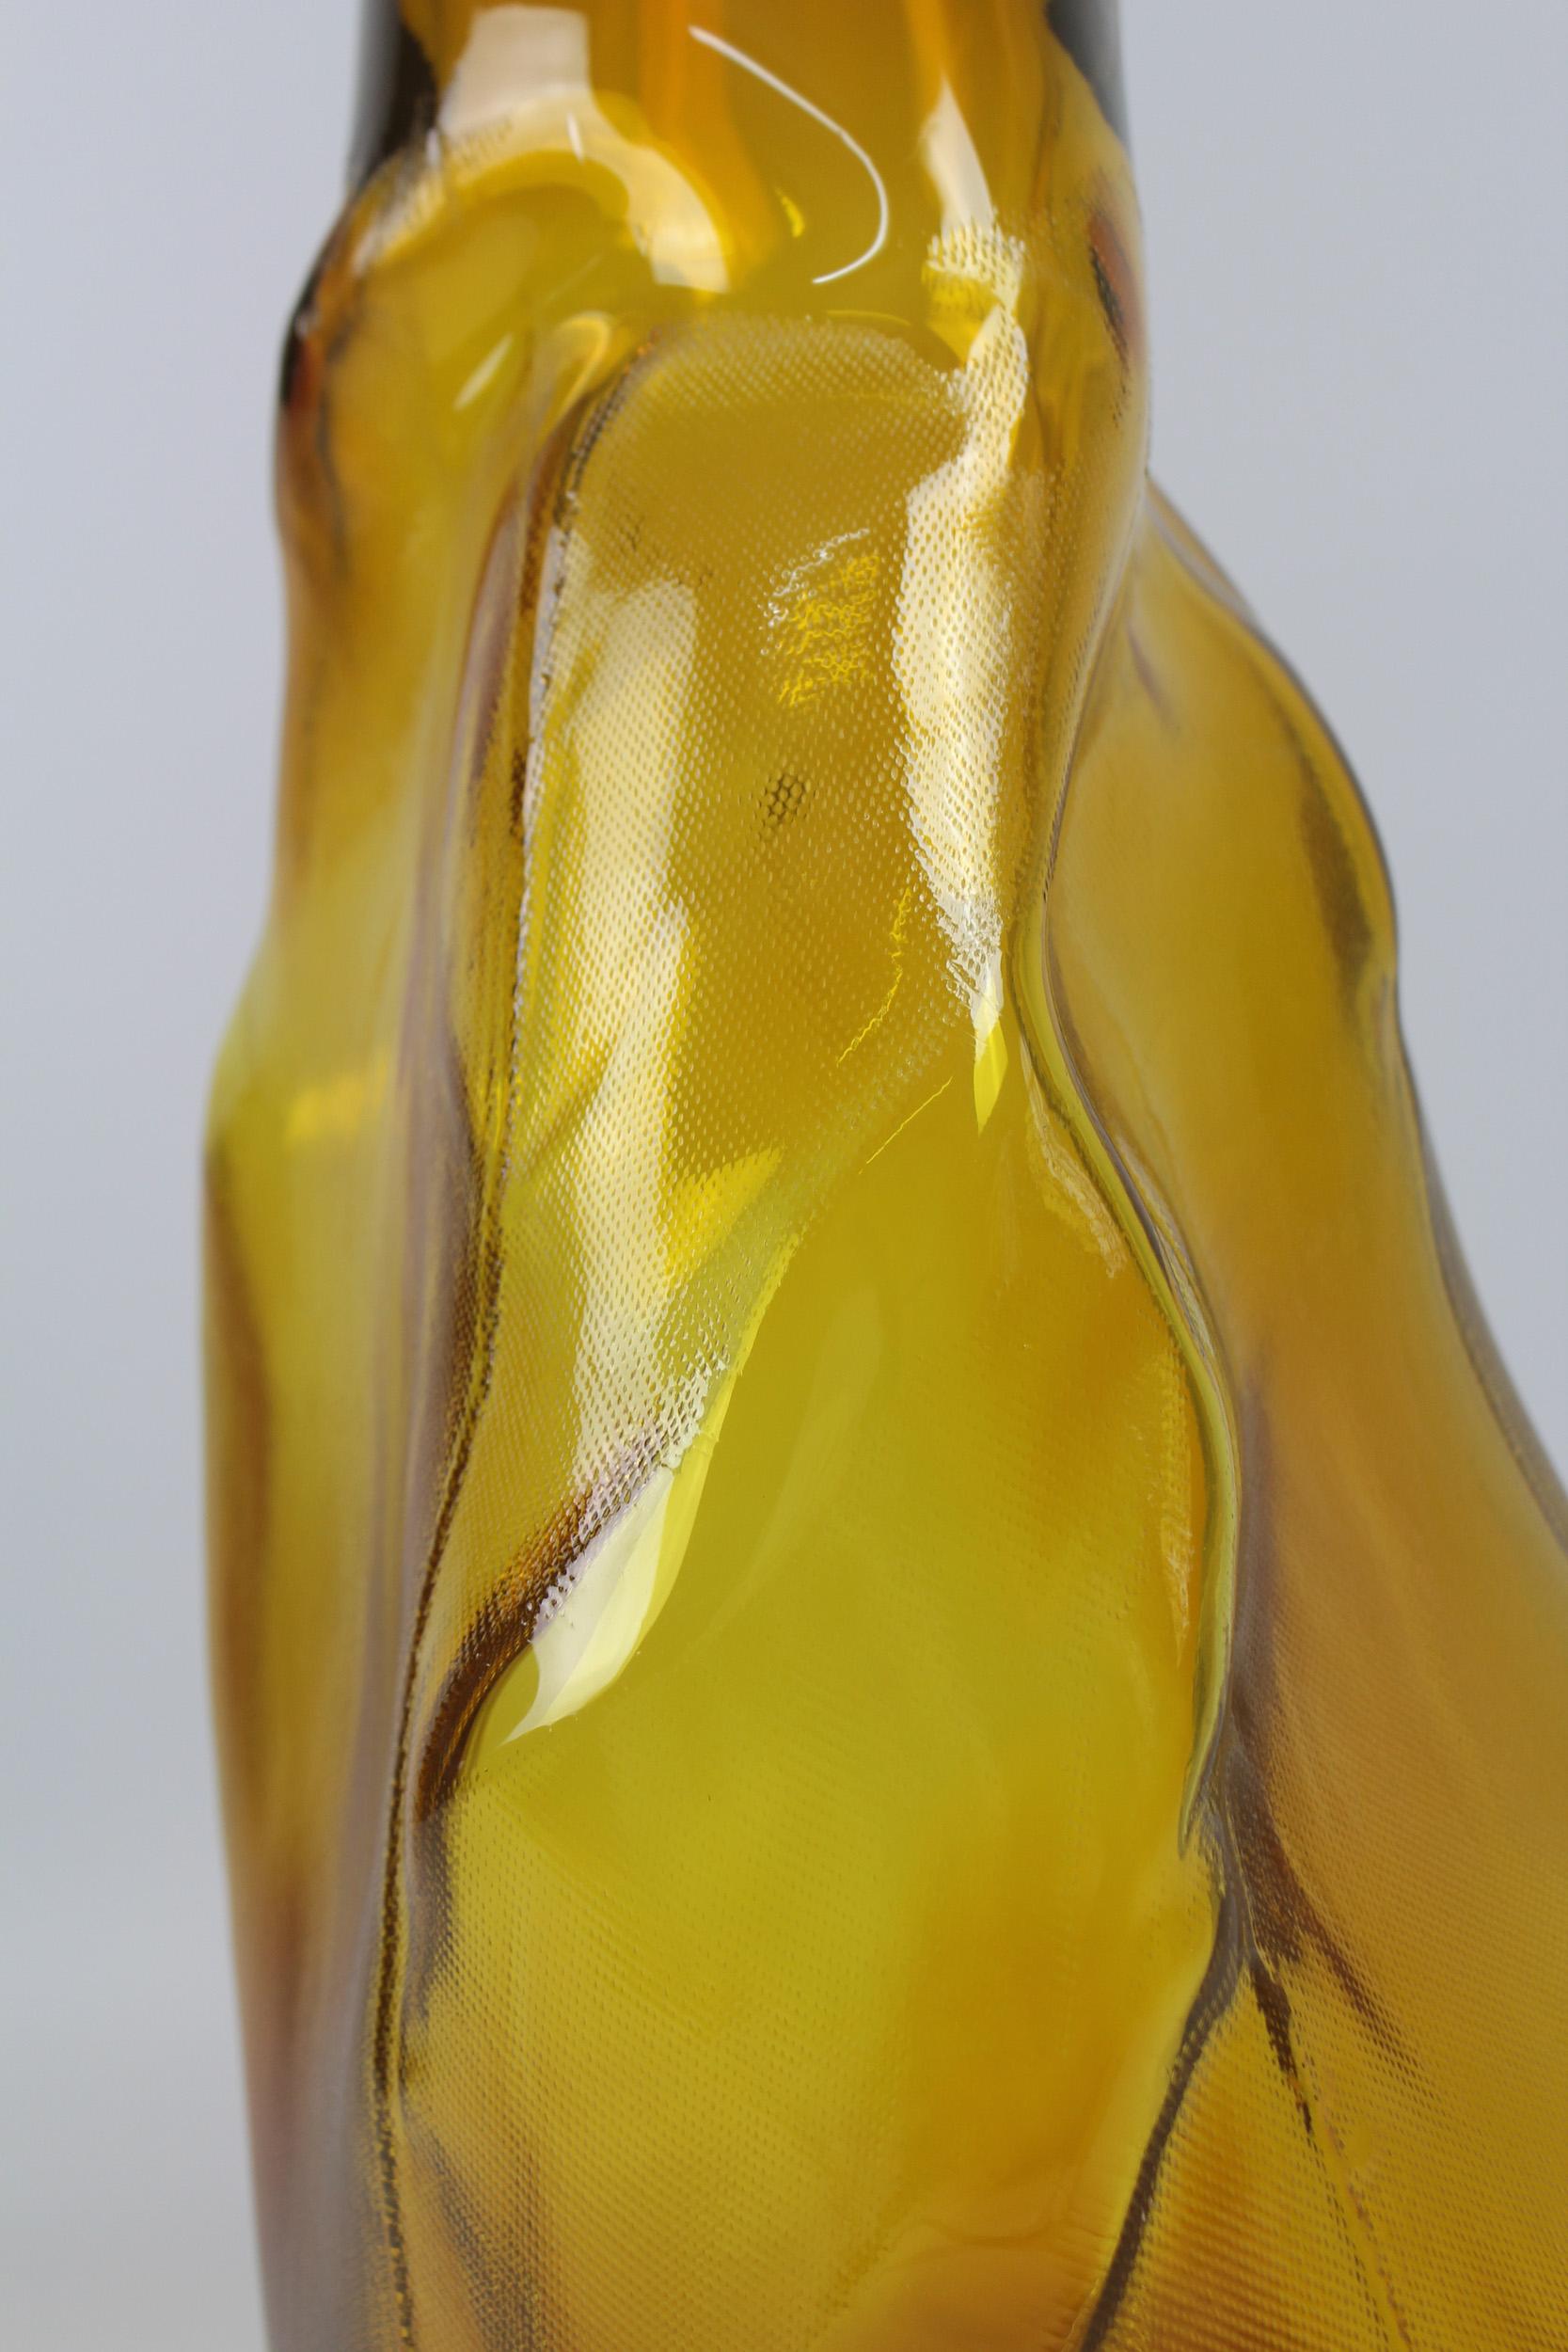 105 Ltr Forms, Brilliant Gold, Handmade Glass Object by Vogel Studio For Sale 1